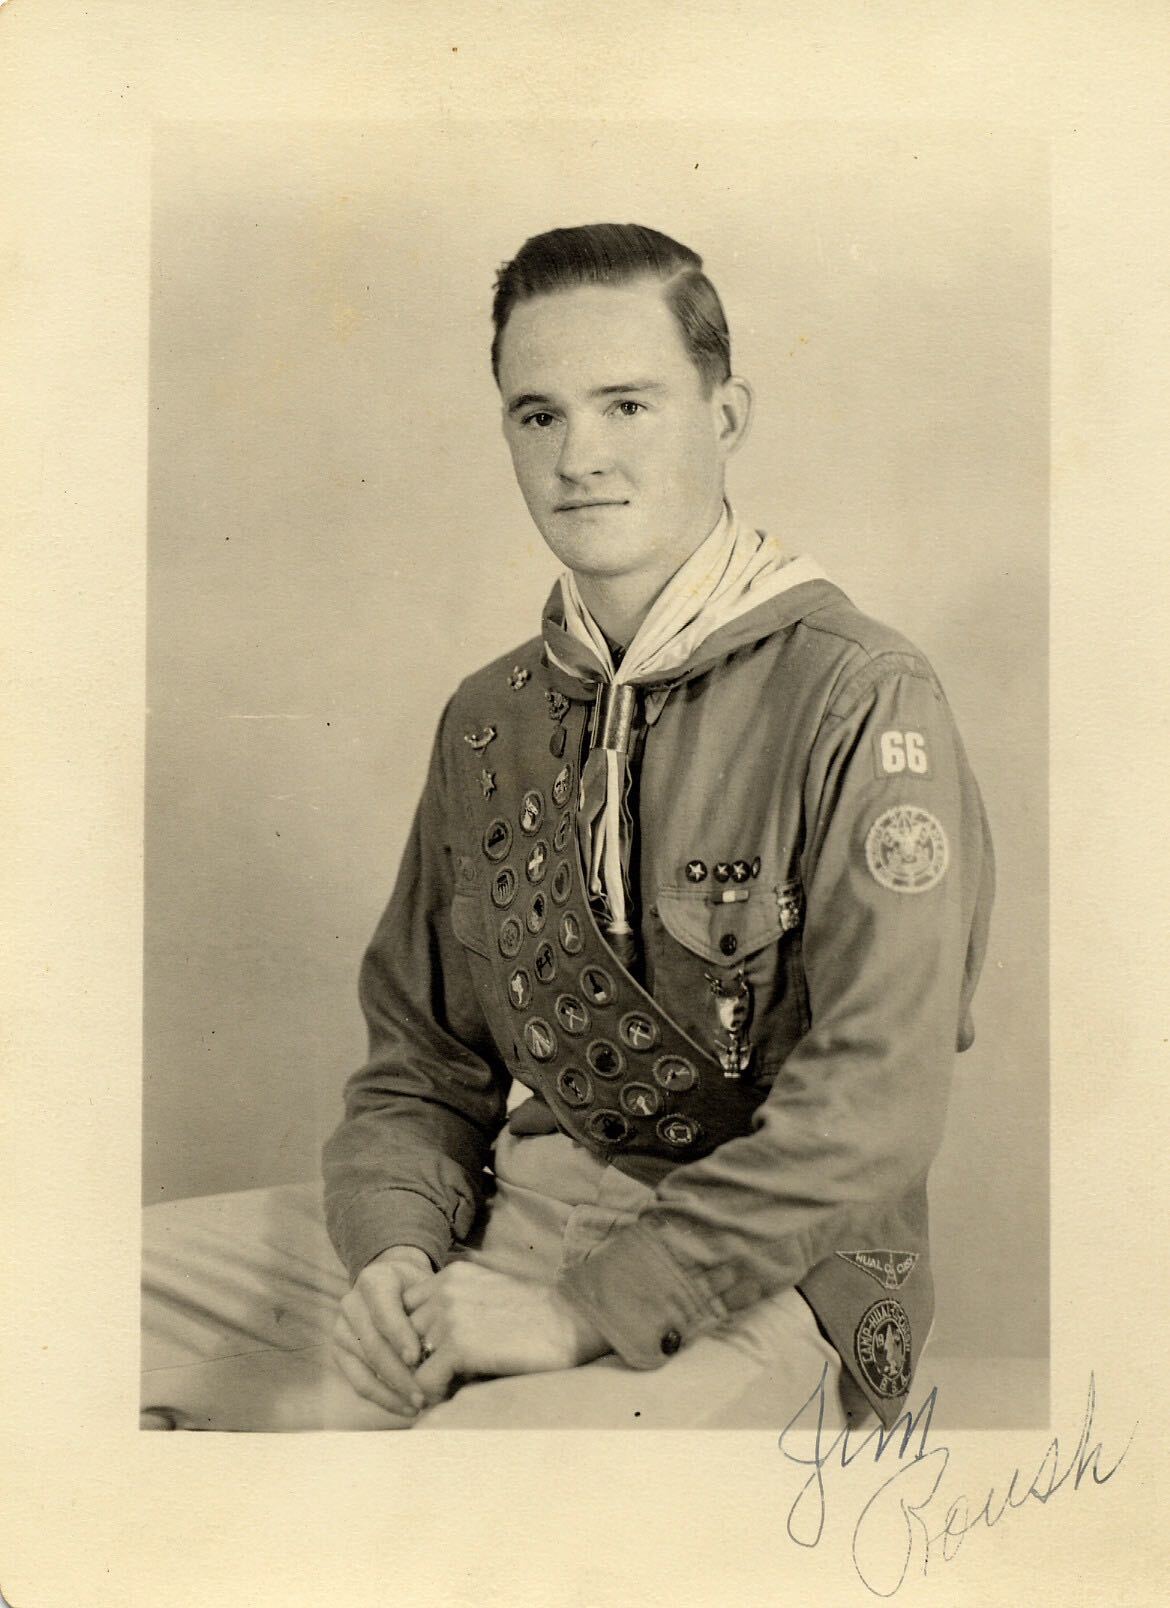 My grandfather, James Chester Roush, in his Eagle Scout uniform